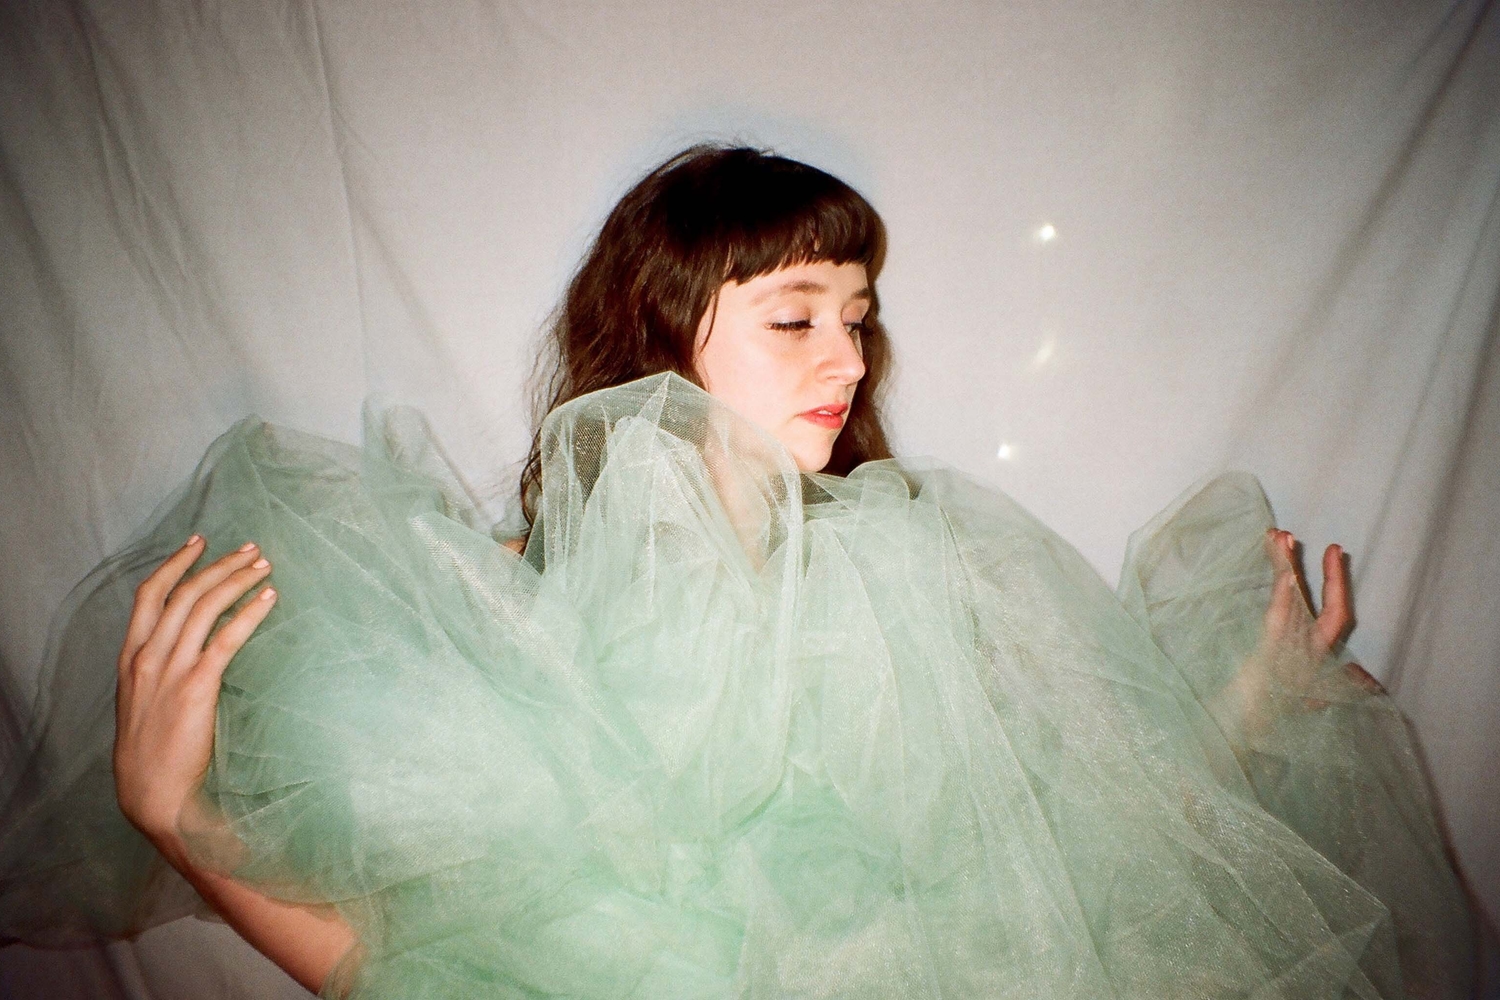 Waxahatchee announces new album ‘Out In The Storm’